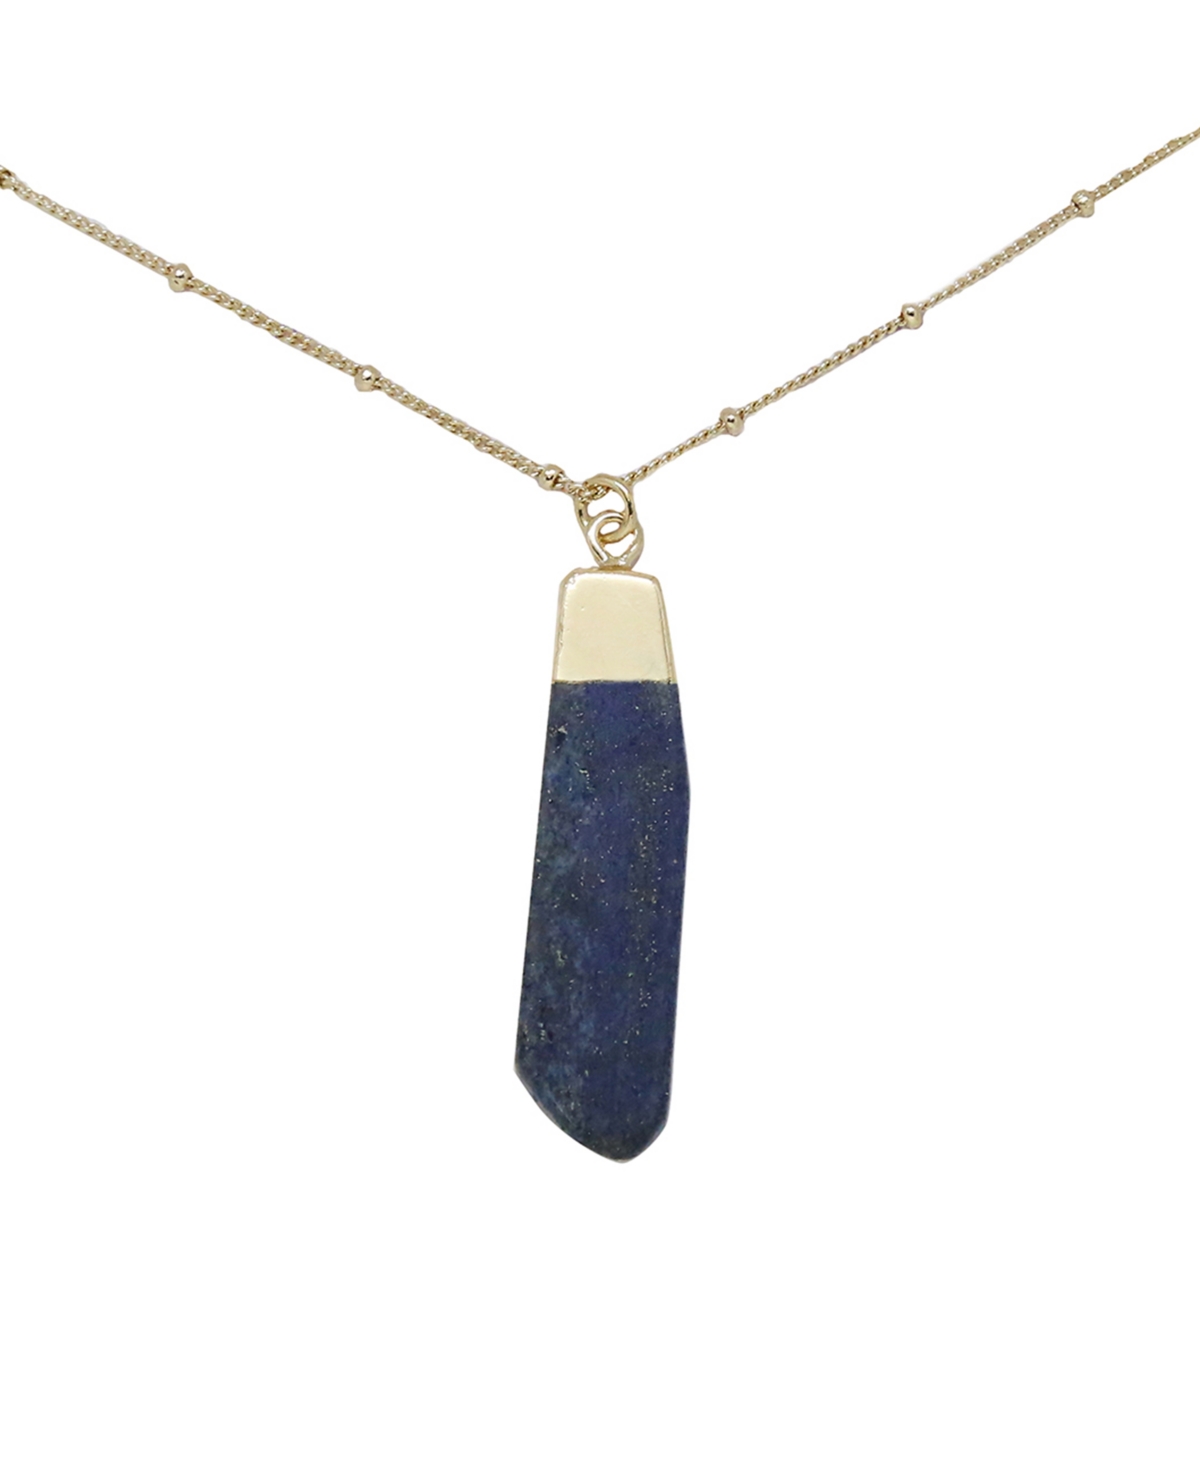 Charged Lapis Pendant Necklace